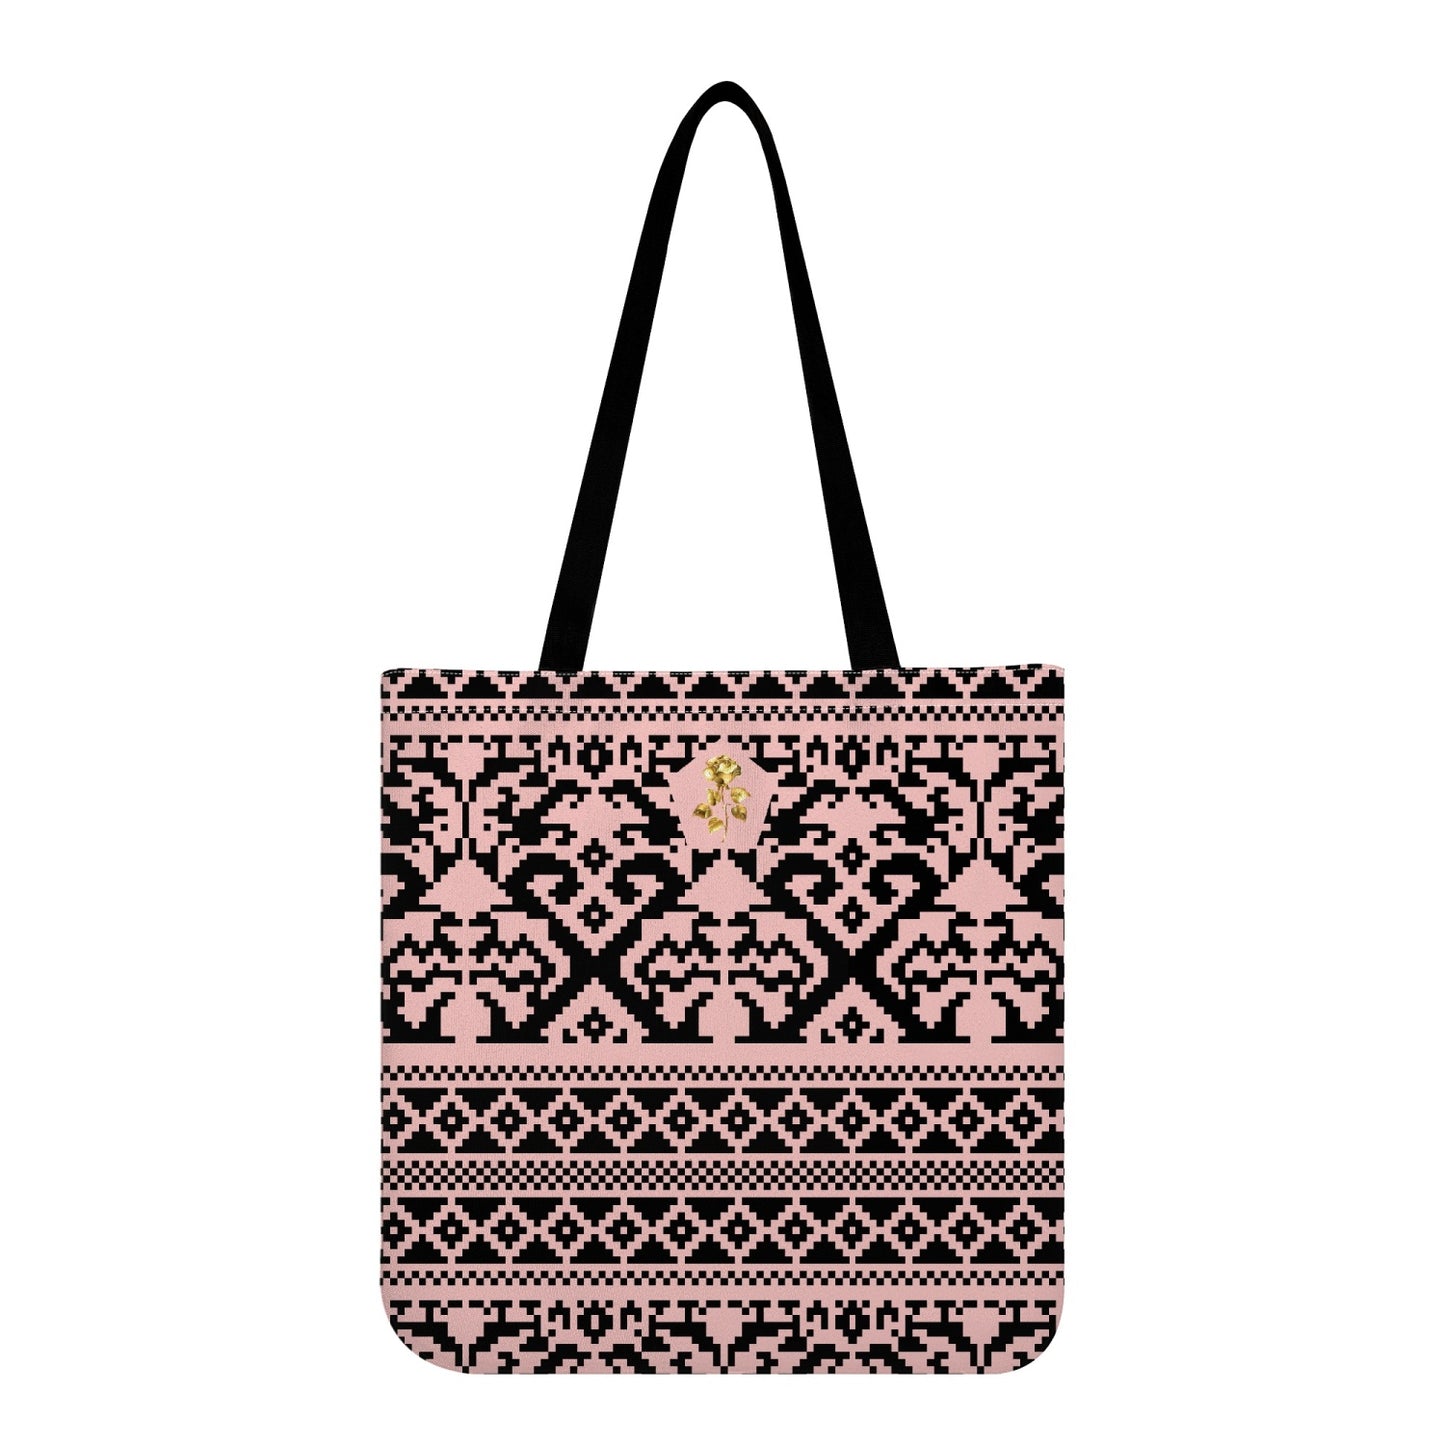 Traditional style TOTE